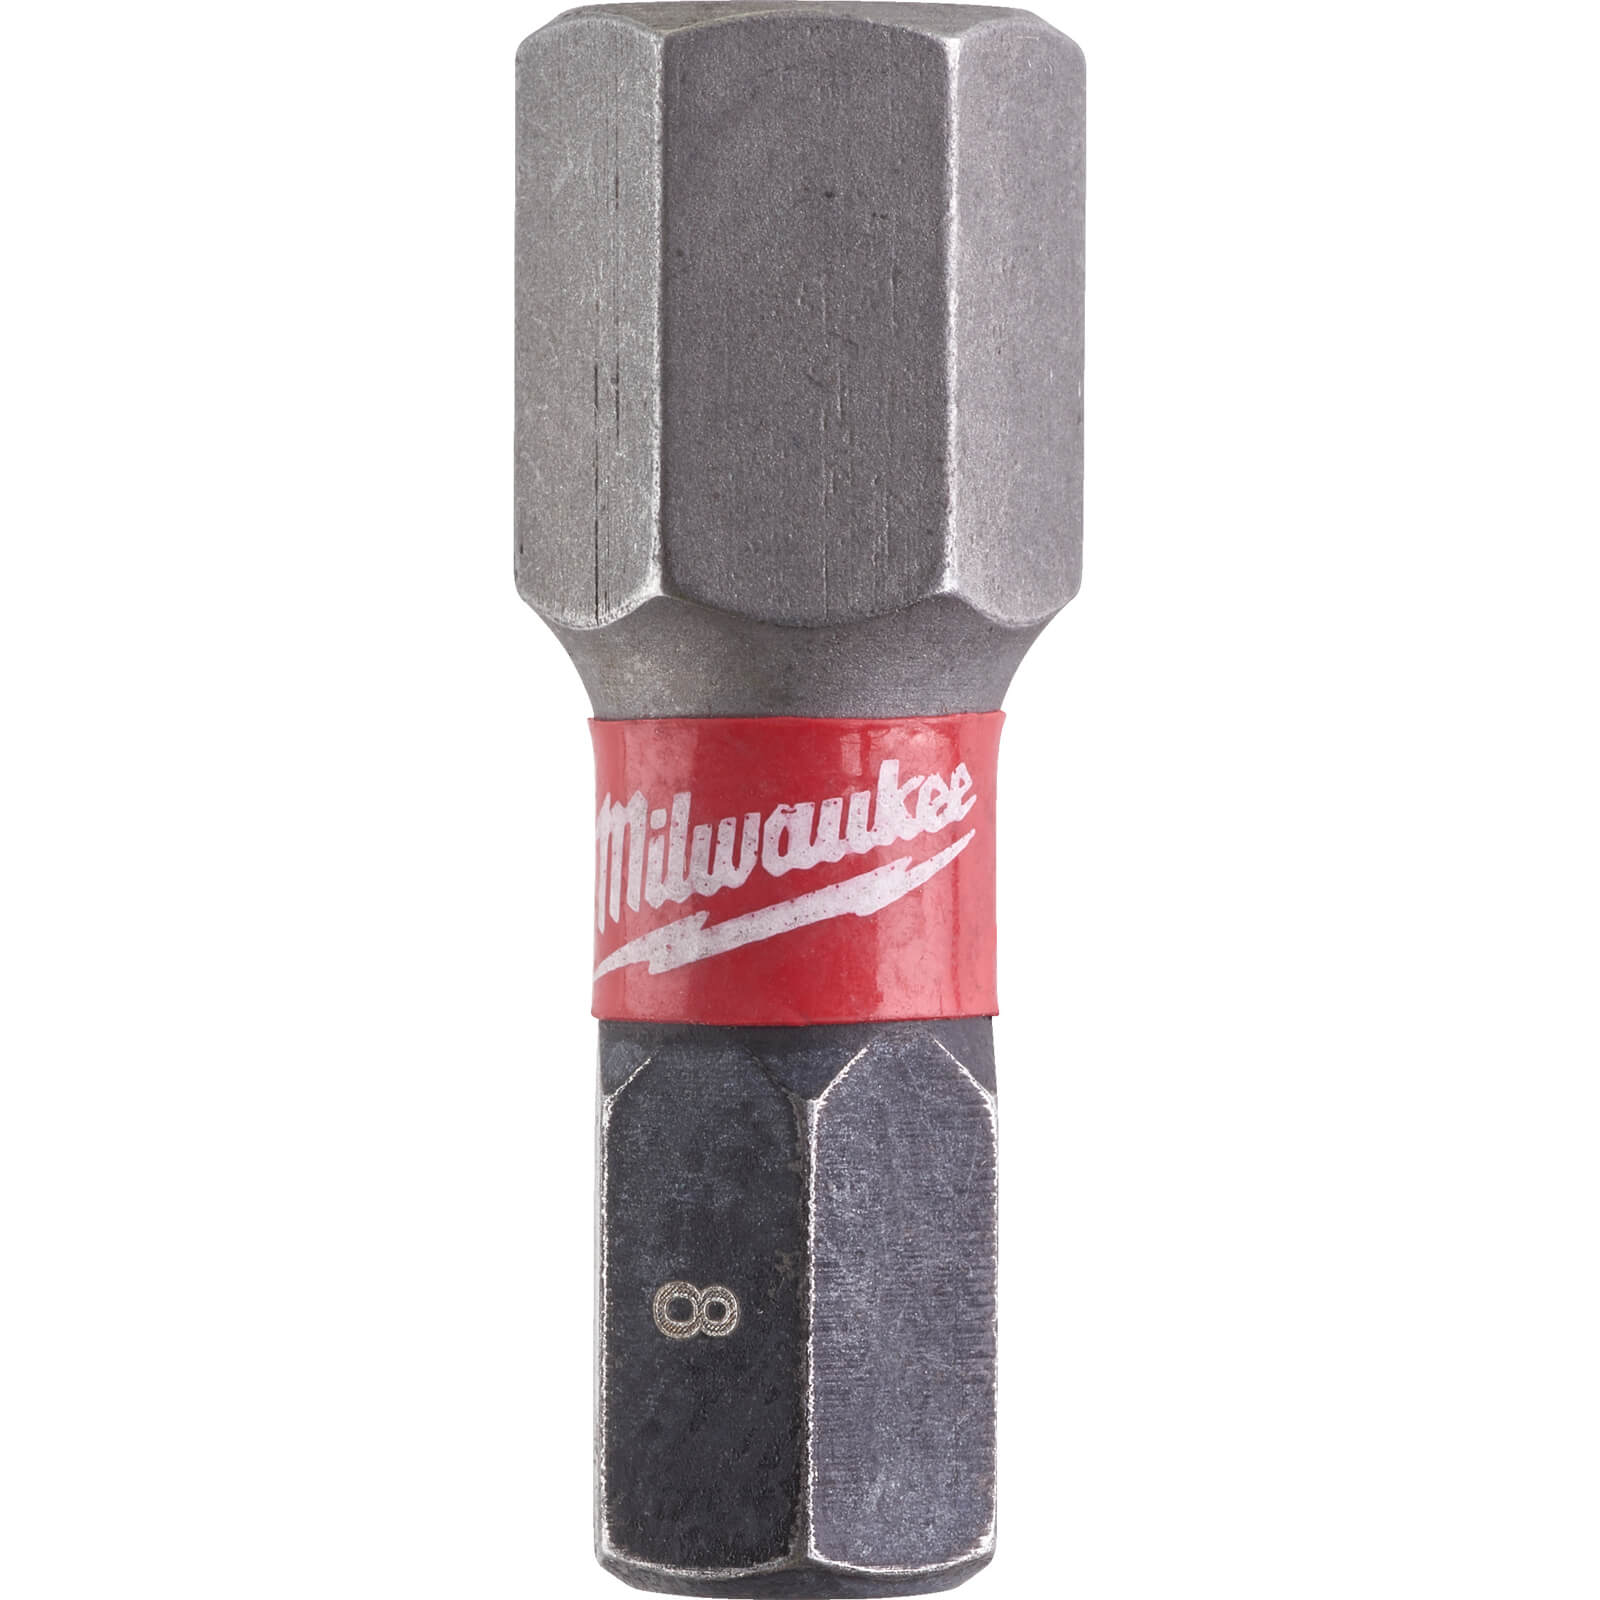 Milwaukee Shockwave Impact Duty Hex Screwdriver Bits Hex 8mm 25mm Pack of 2